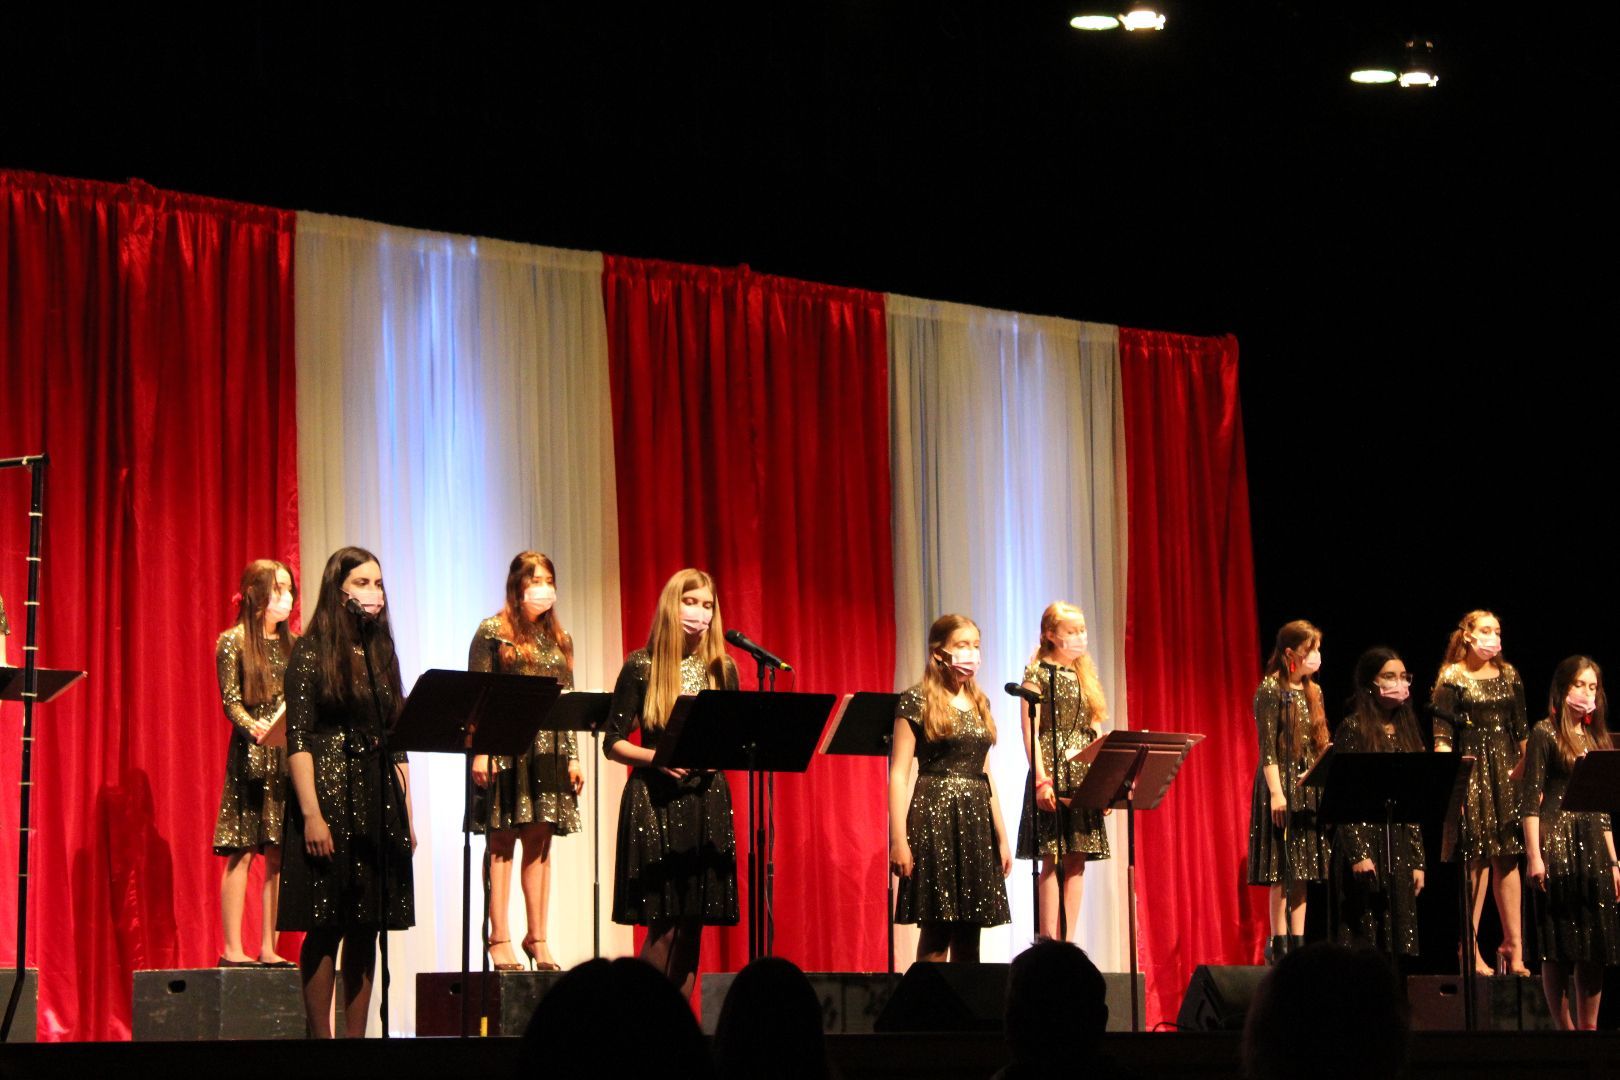 A group of young girls are singing on a stage.